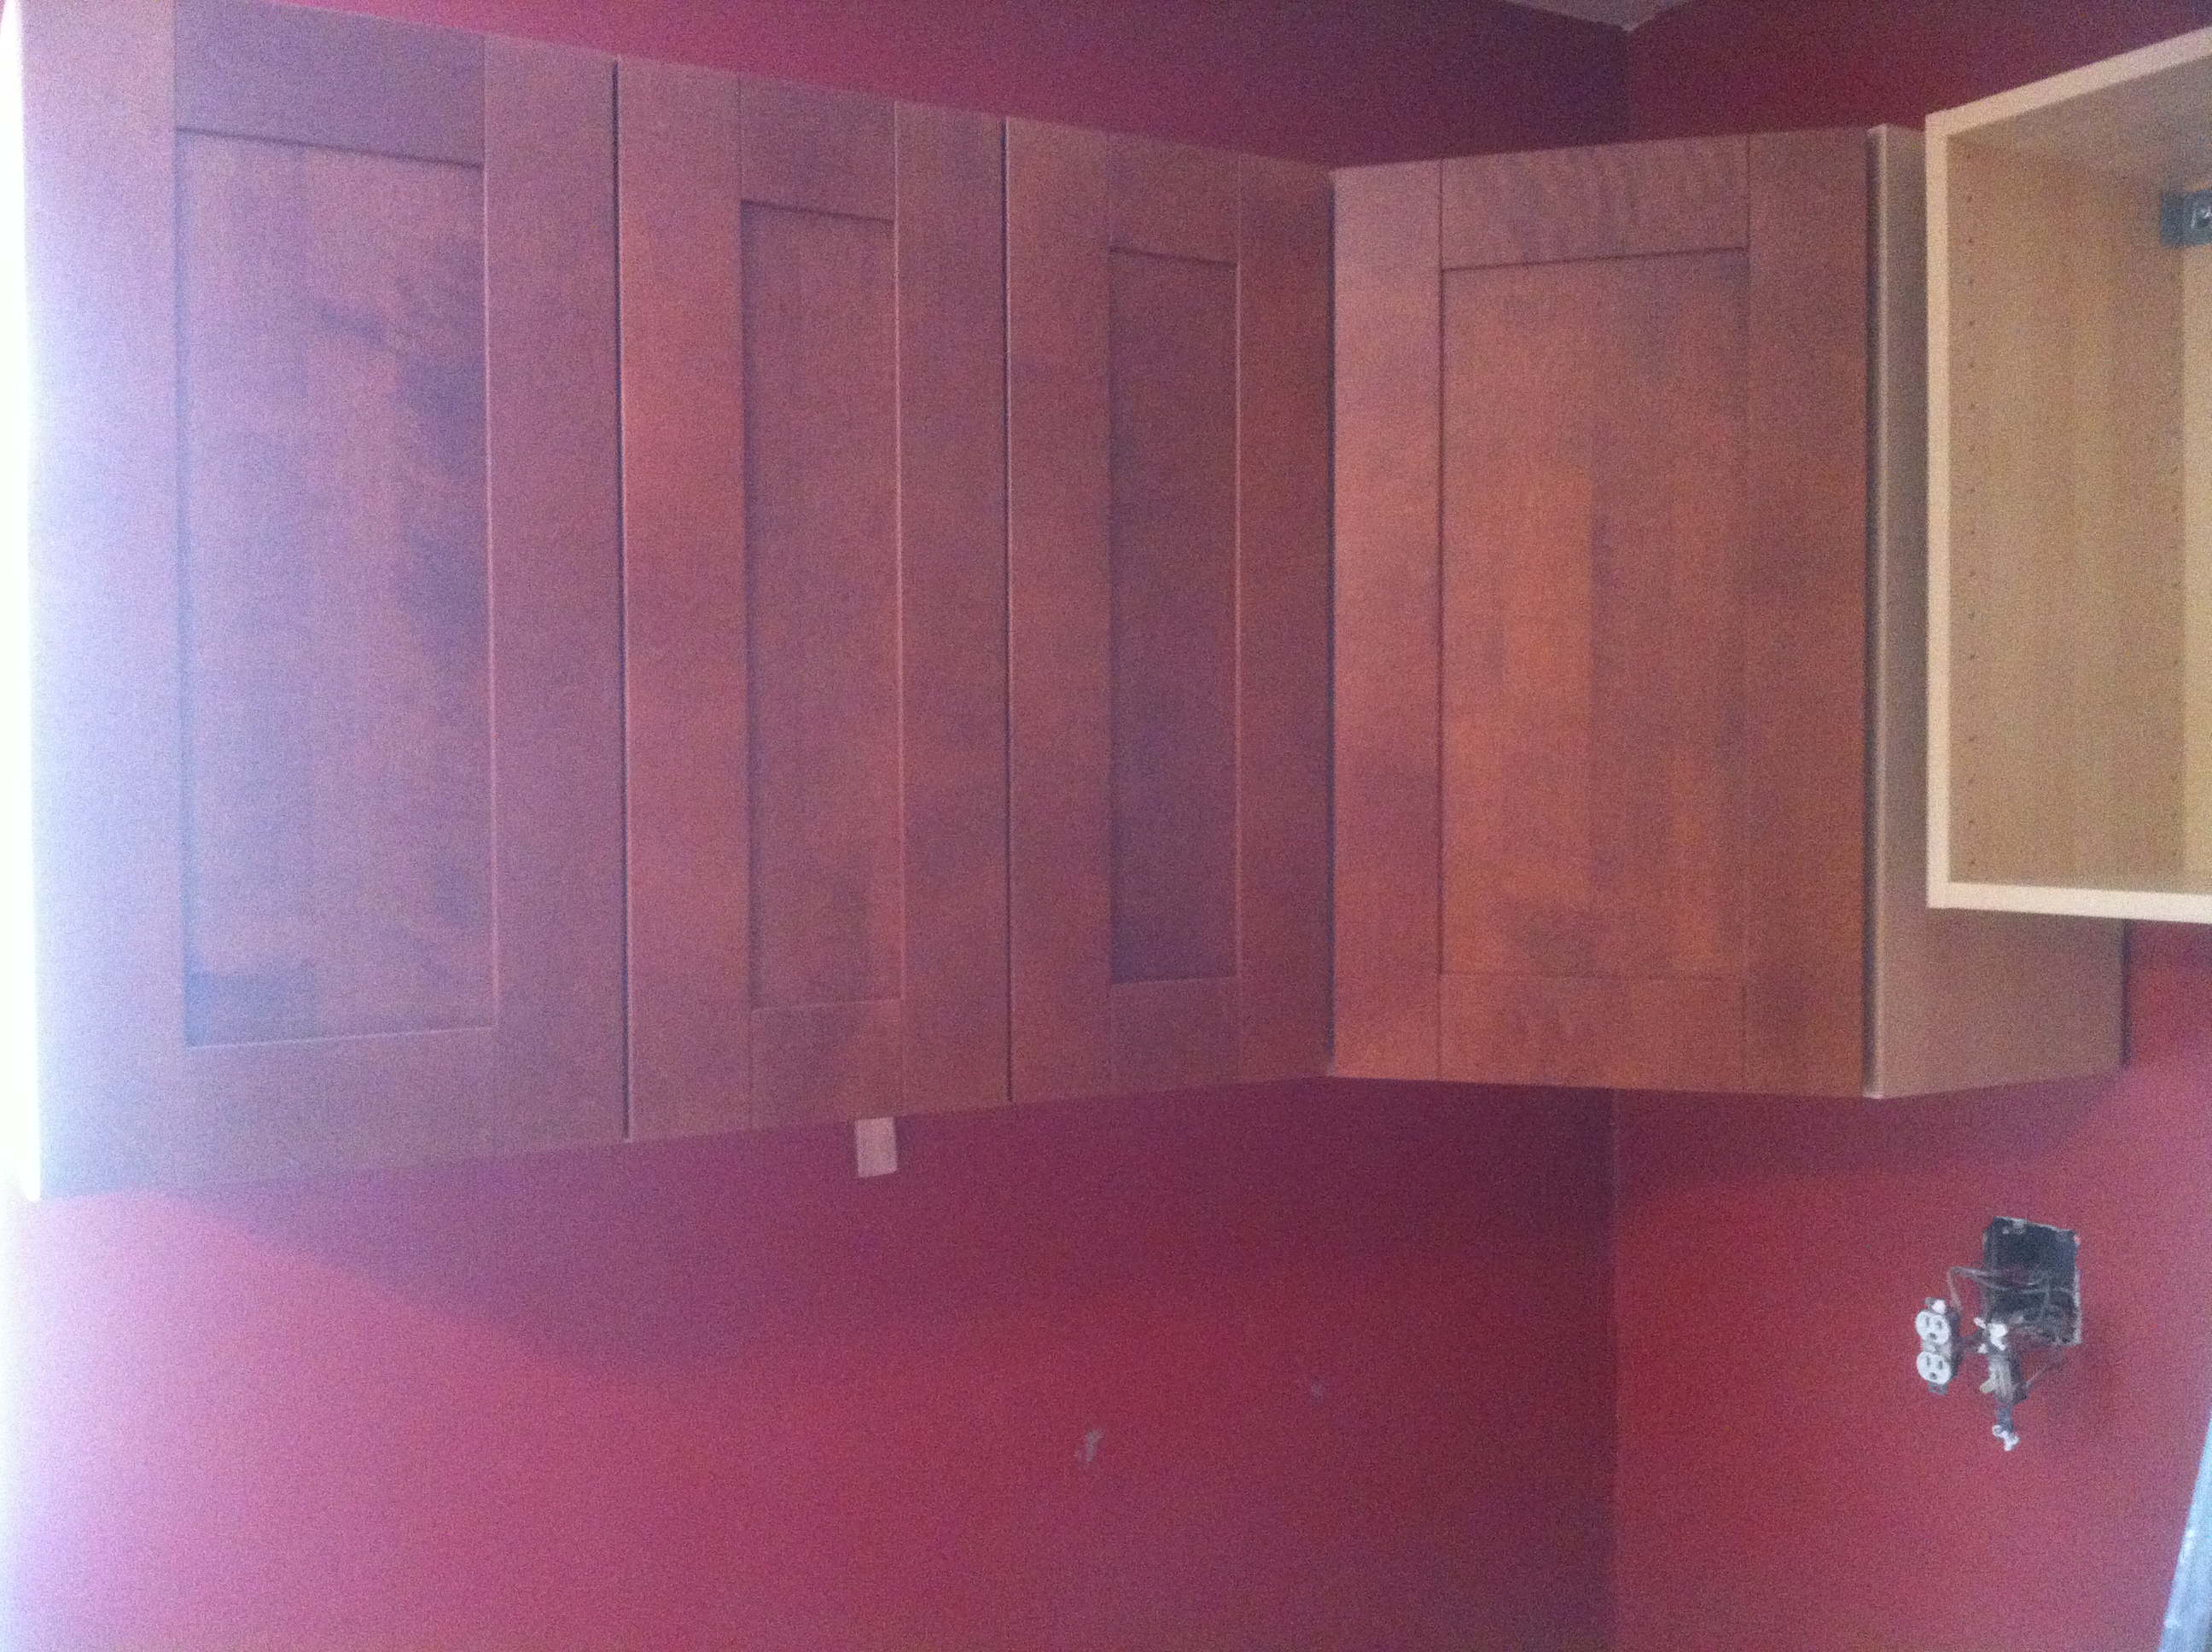 left wall cabinets